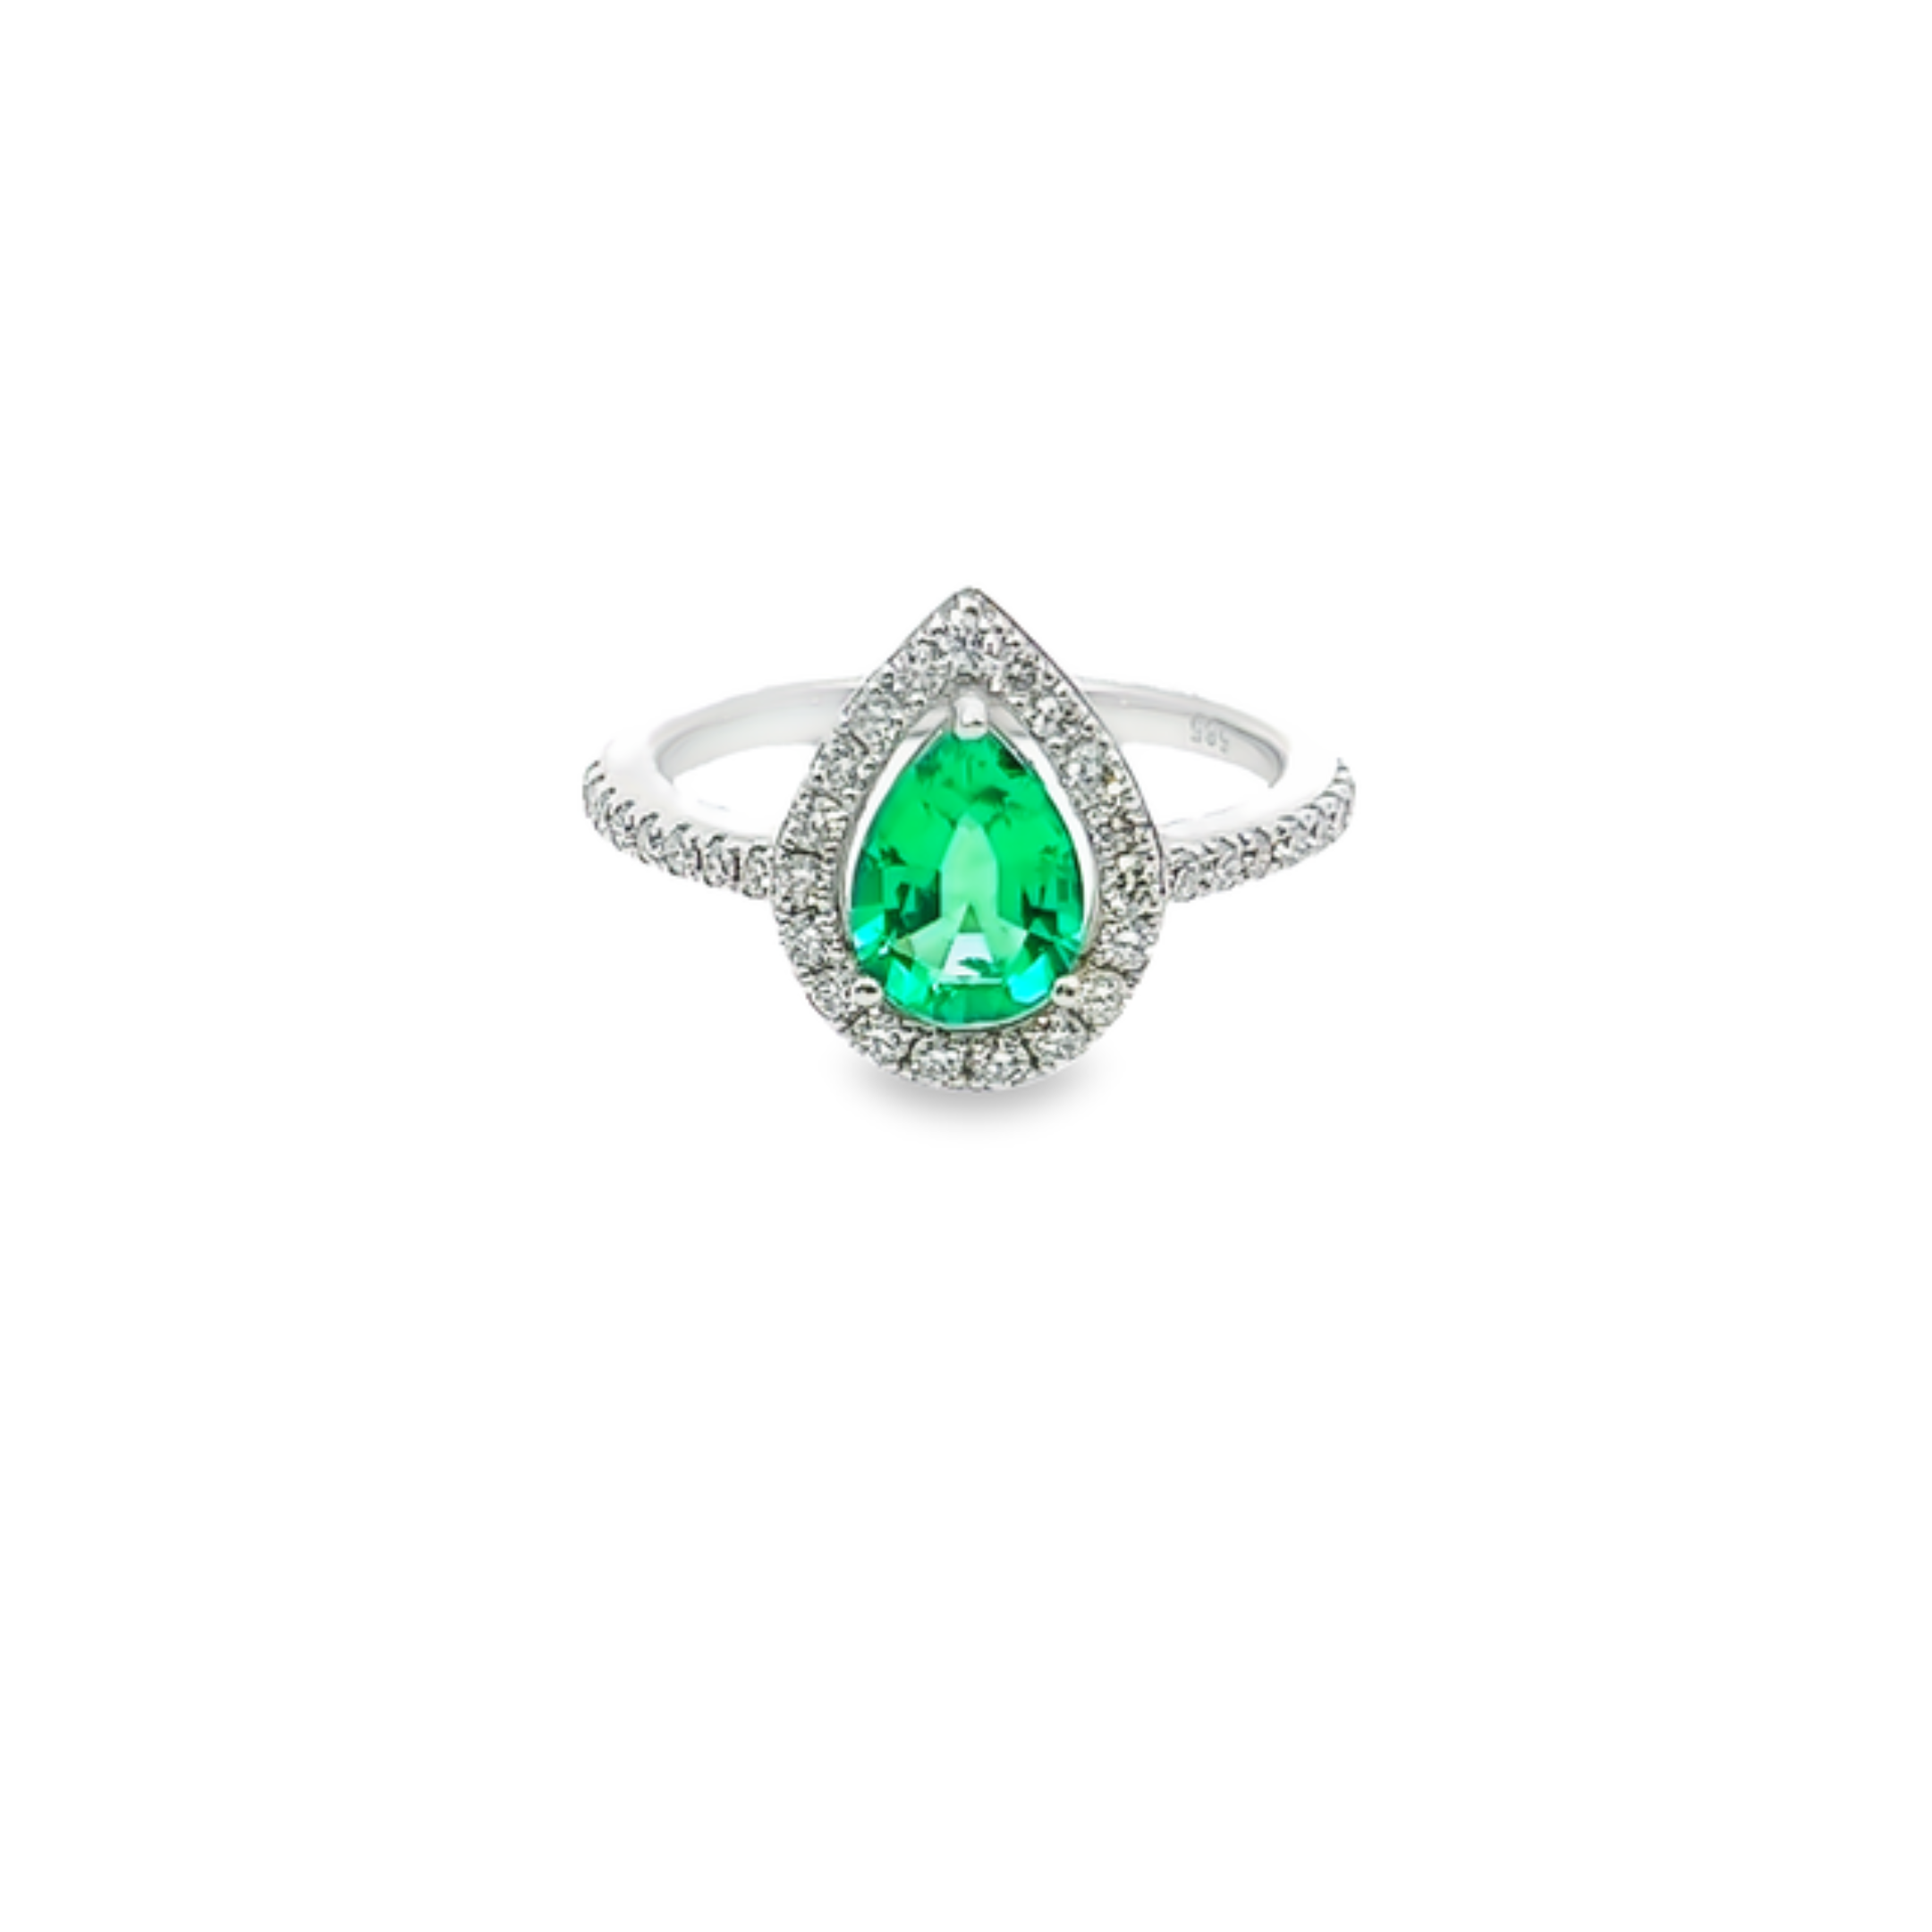 14k White Gold Diamond With Emerald Center Stone Pear Cut Engagement Ring 1.87c